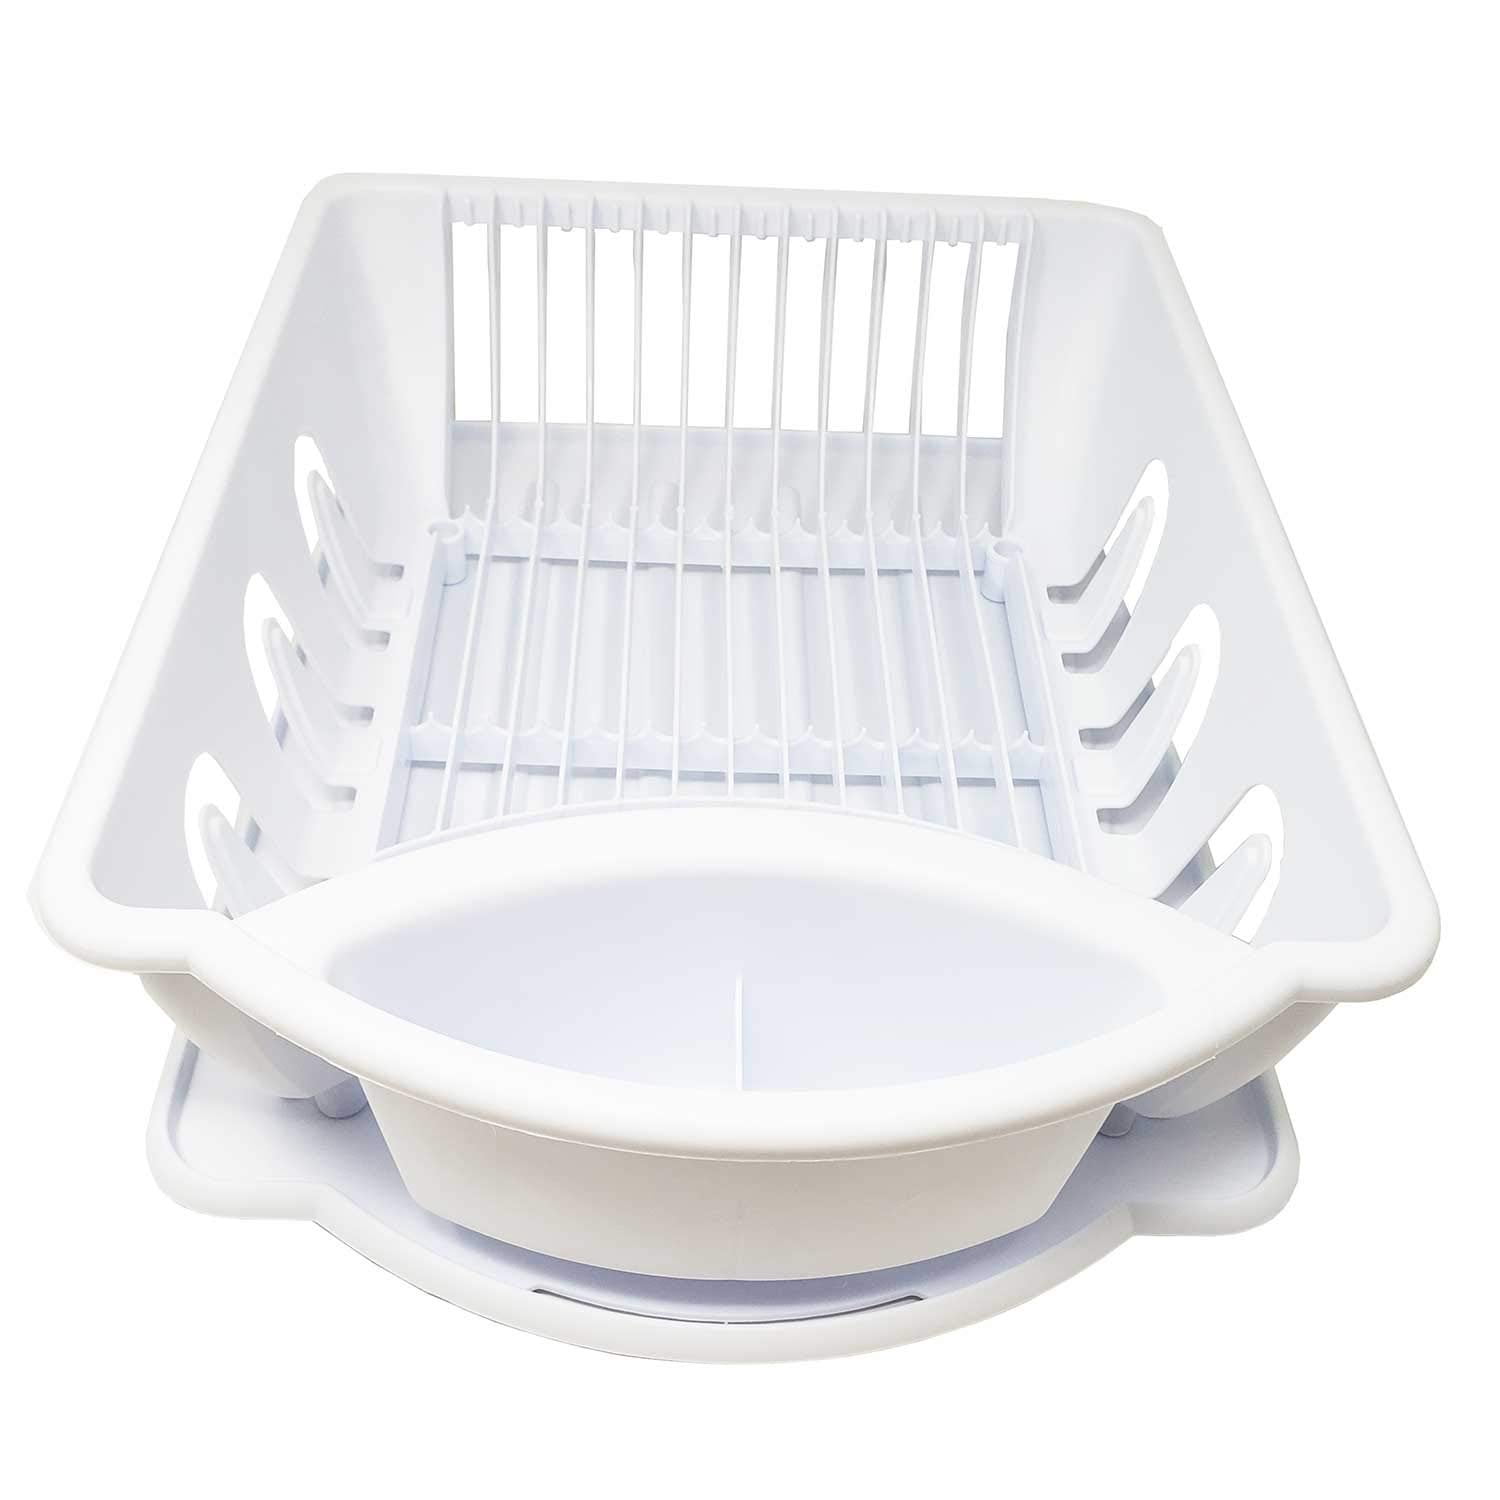 LavoHome Heavy Duty Sturdy Hard Plastic Sink Set with Dish Rack with Drainer & Drainboard,Easy to Clean with Snap Lock Tab Cup Holders for Home Kitchen Sink